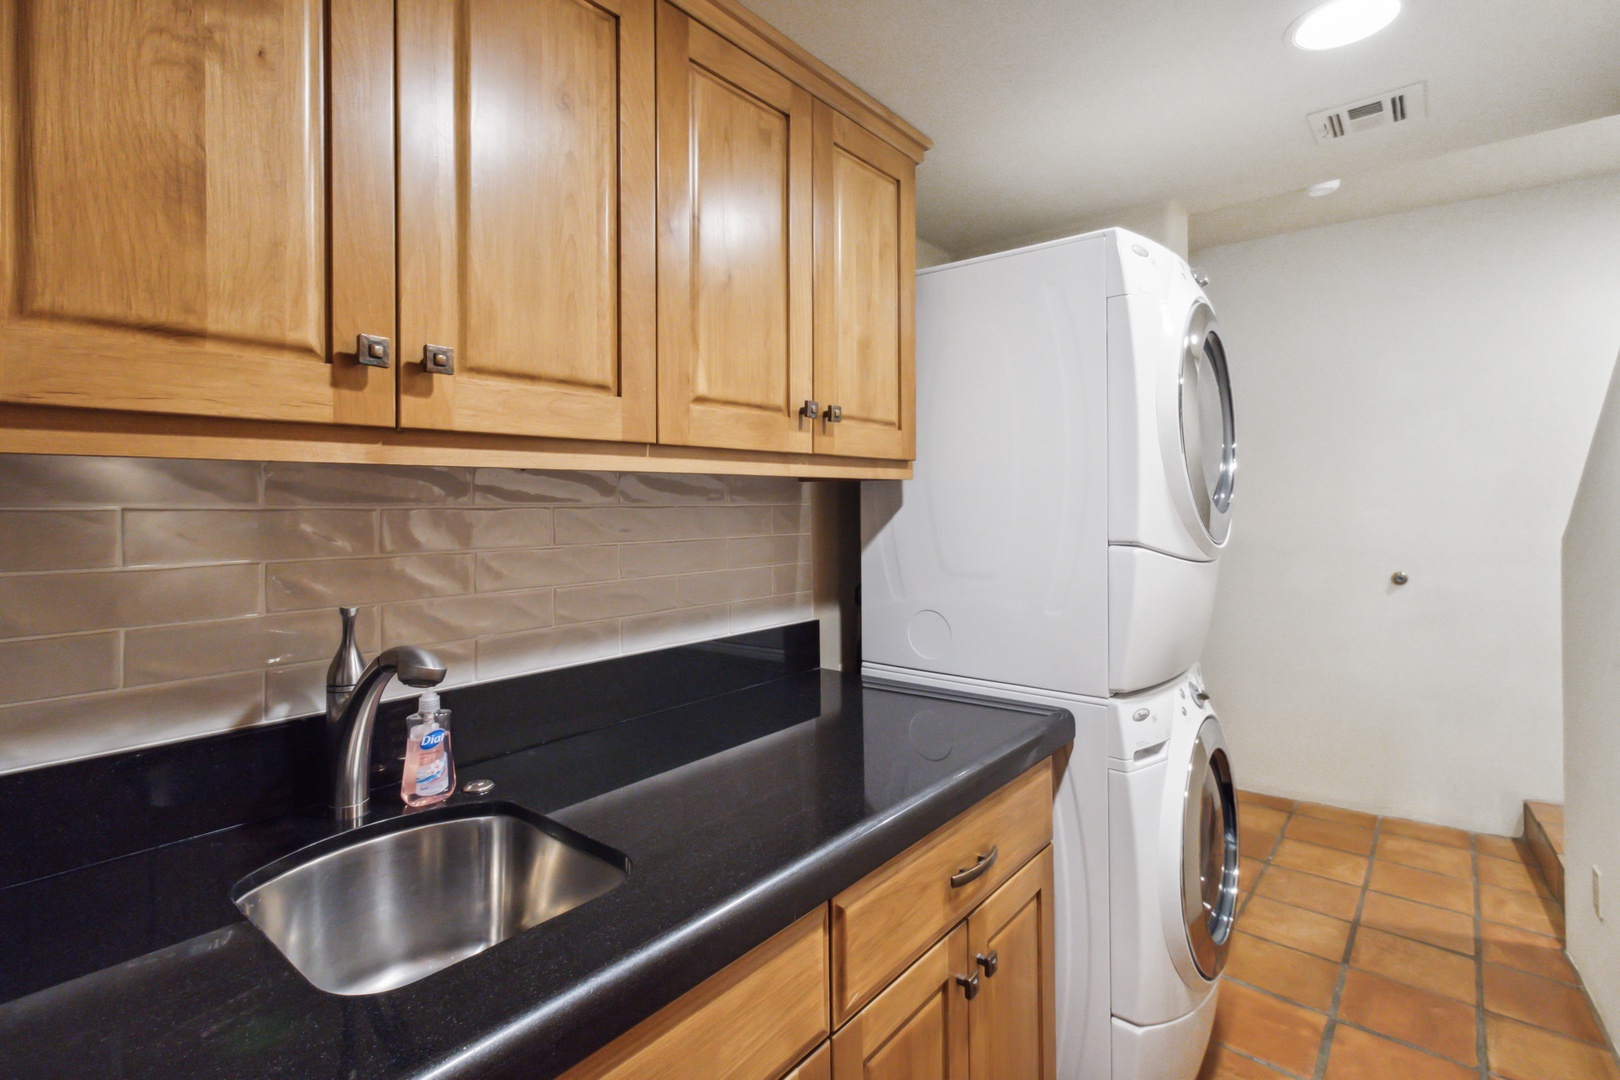 Scottsdale Vacation Rentals, Boulders Hideaway Villa - Laundry room with washer and dryer for your convenience